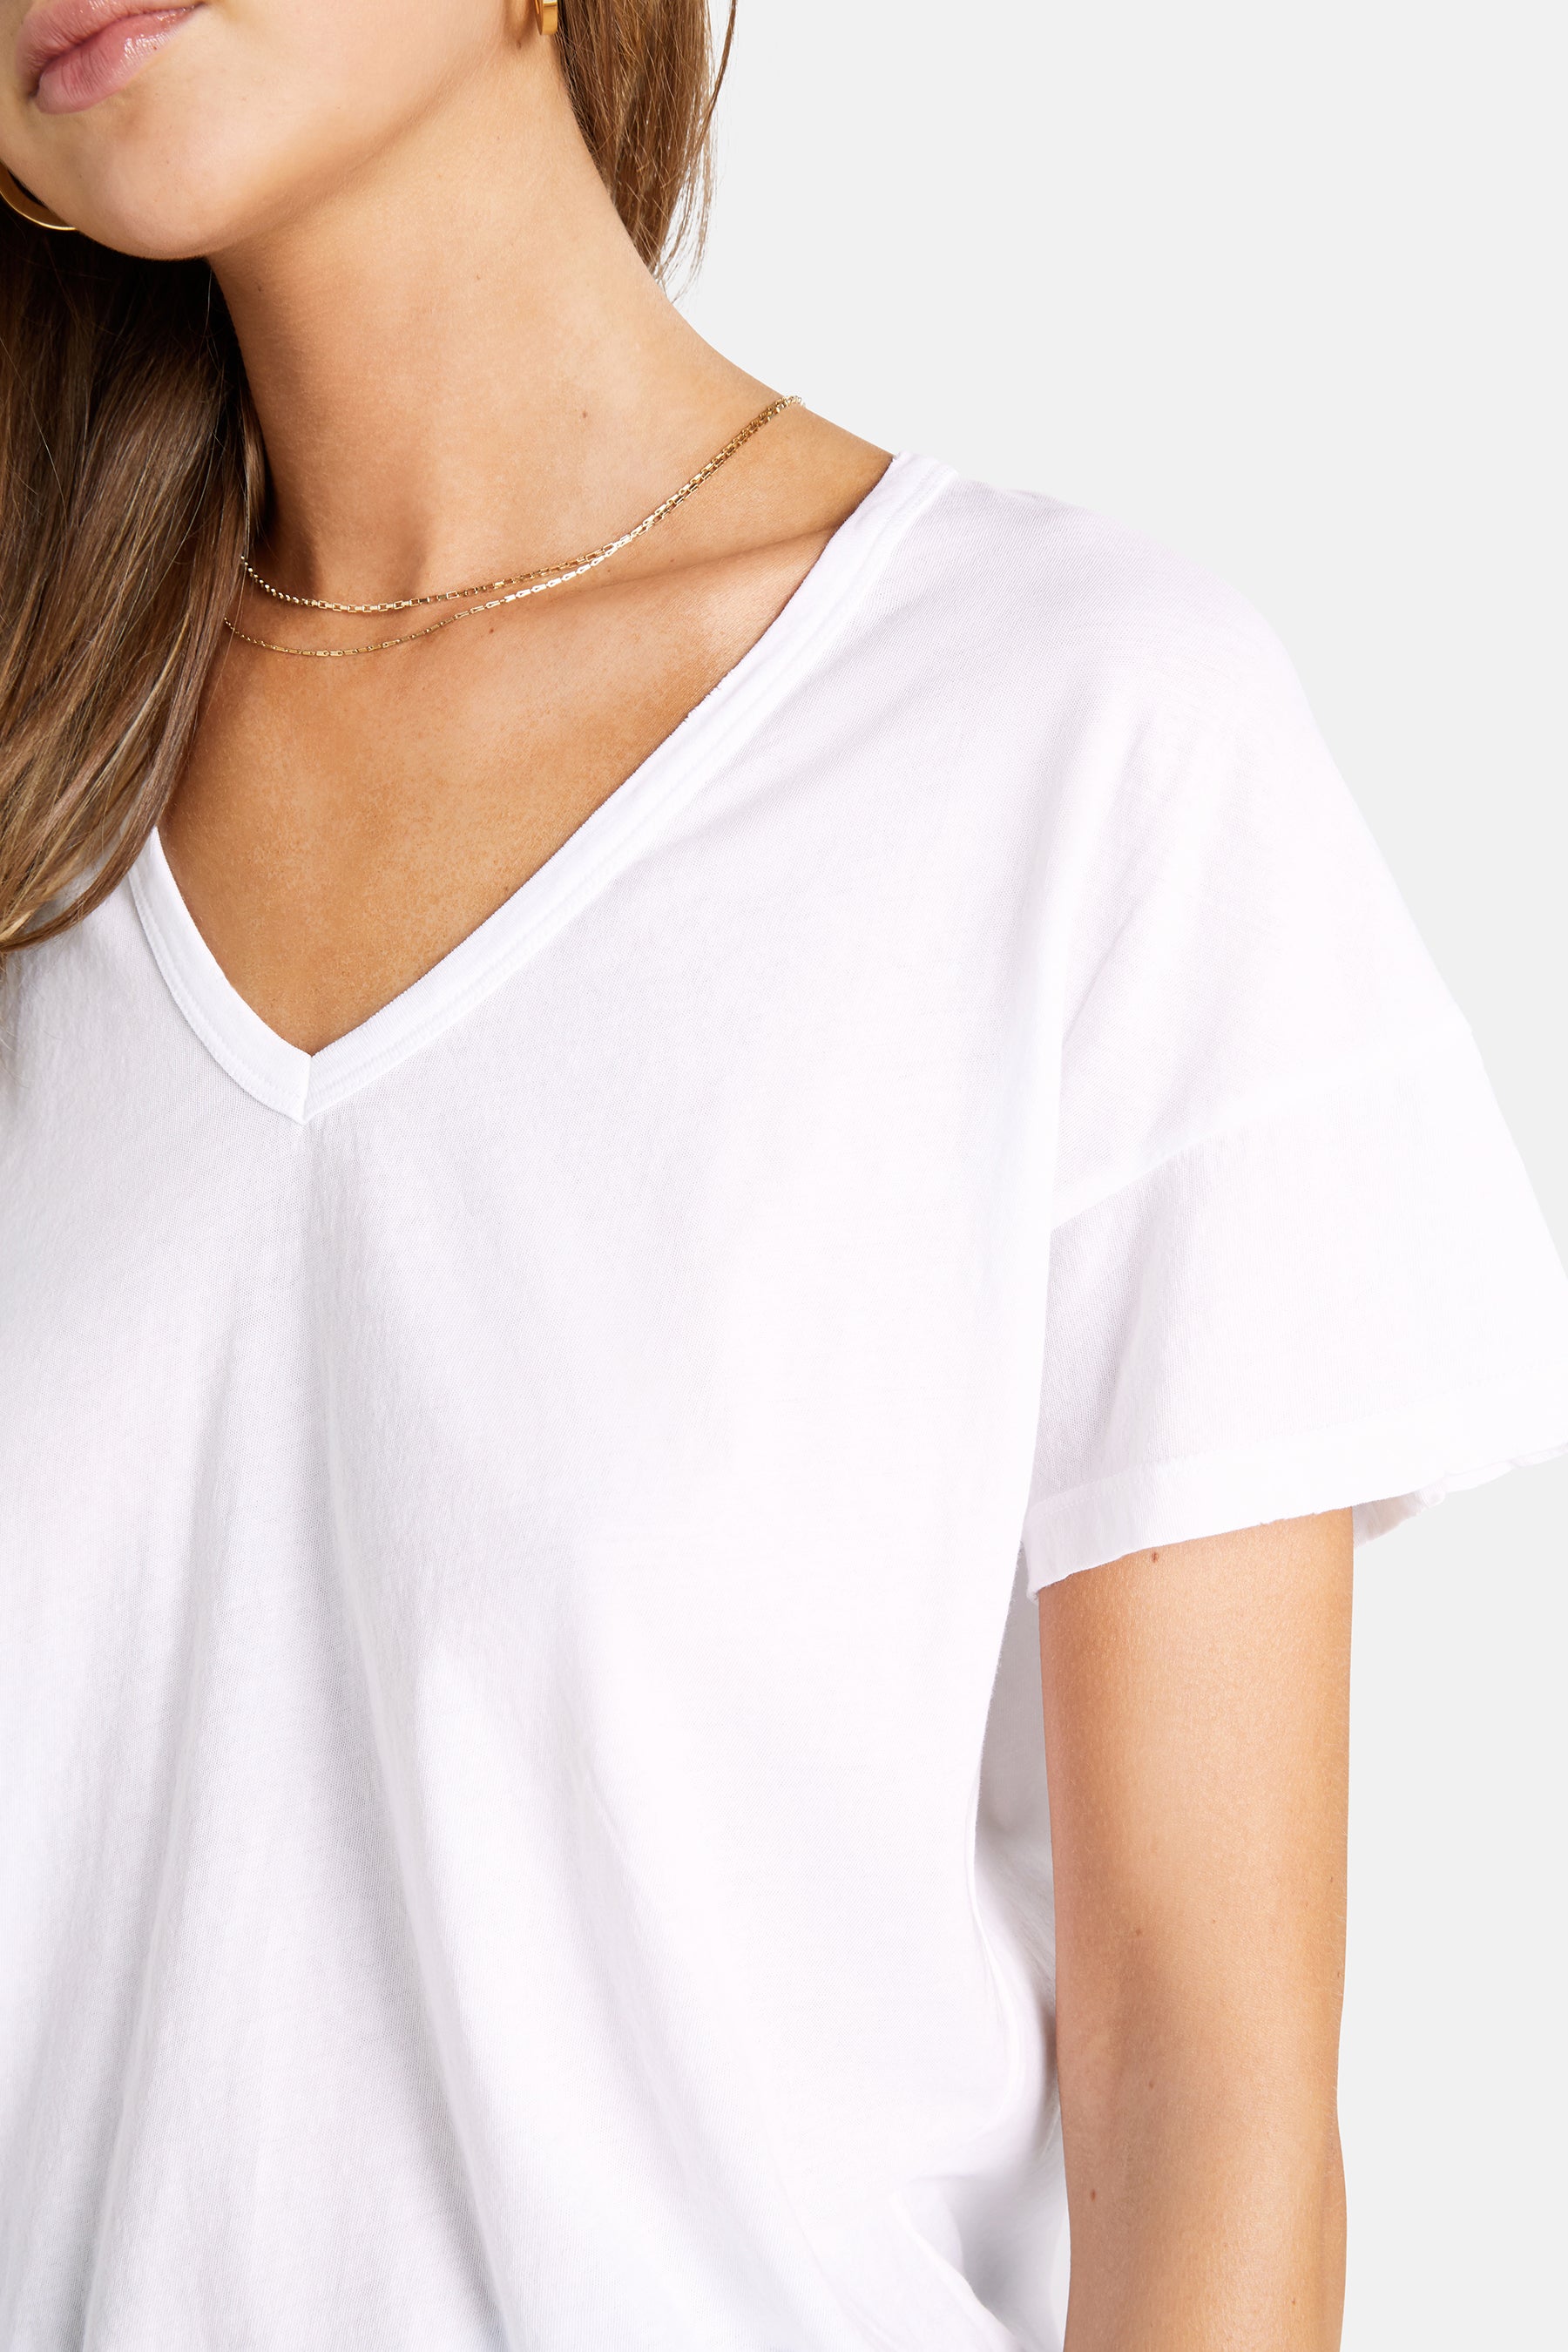 Women's Chrissy V-neck Tee in Clean White – Wildfox Couture